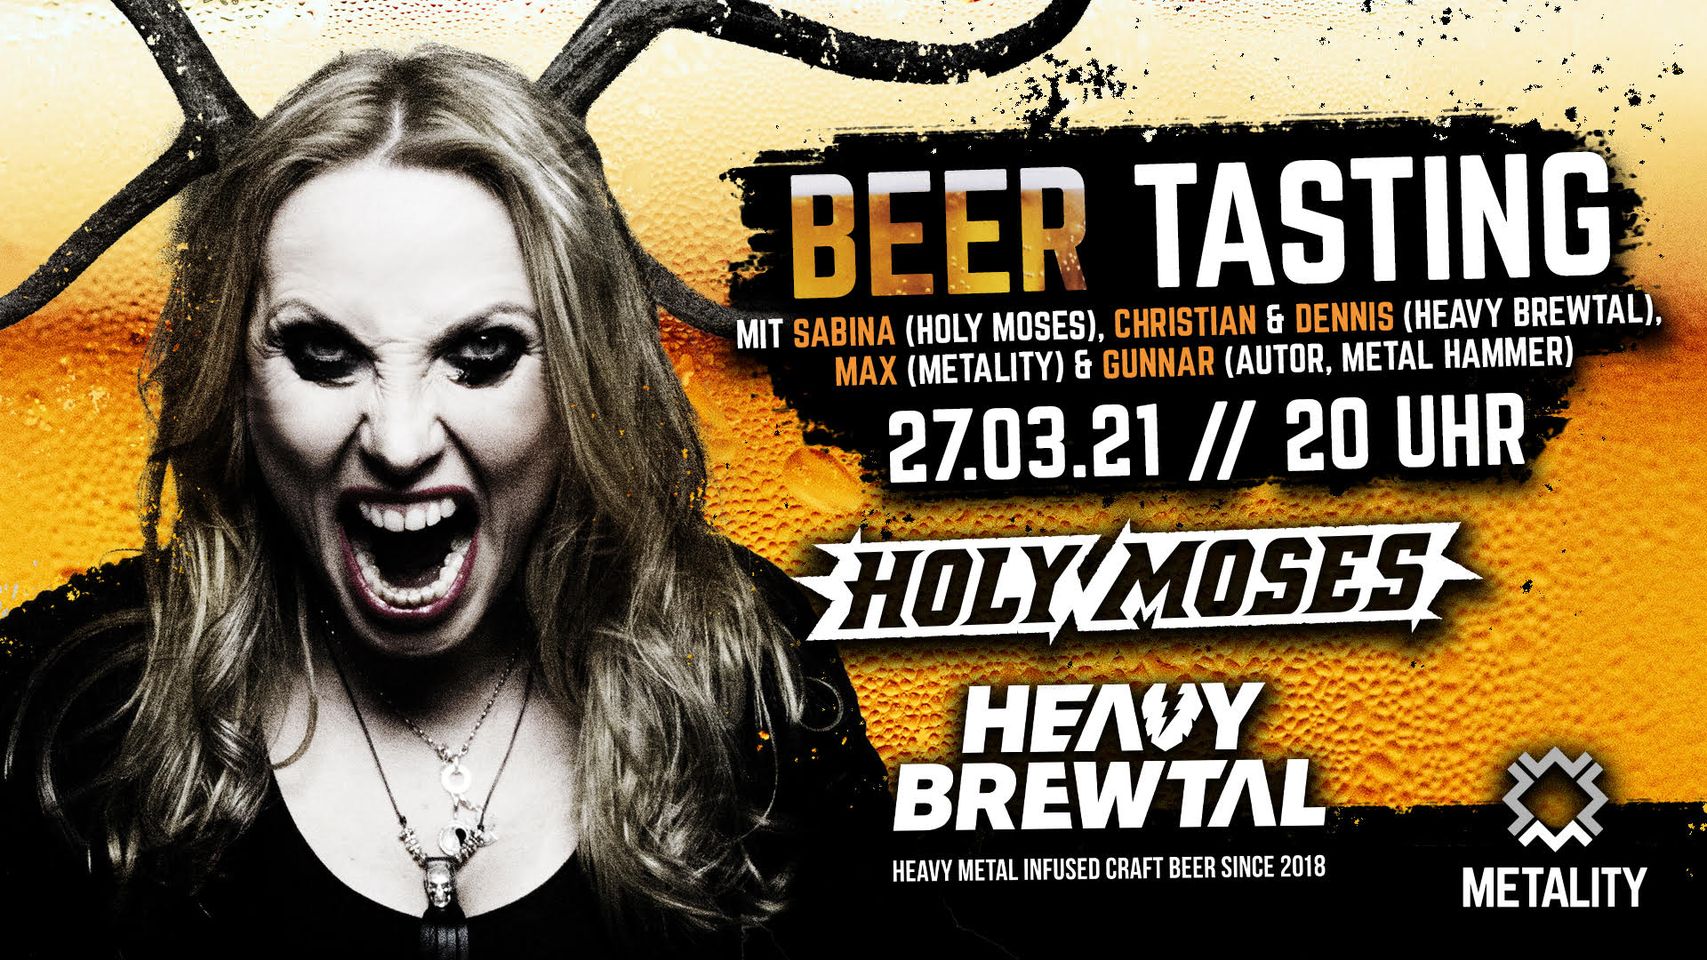 4. Metality Beer Tasting with Heavy Brewtal & Special Guest